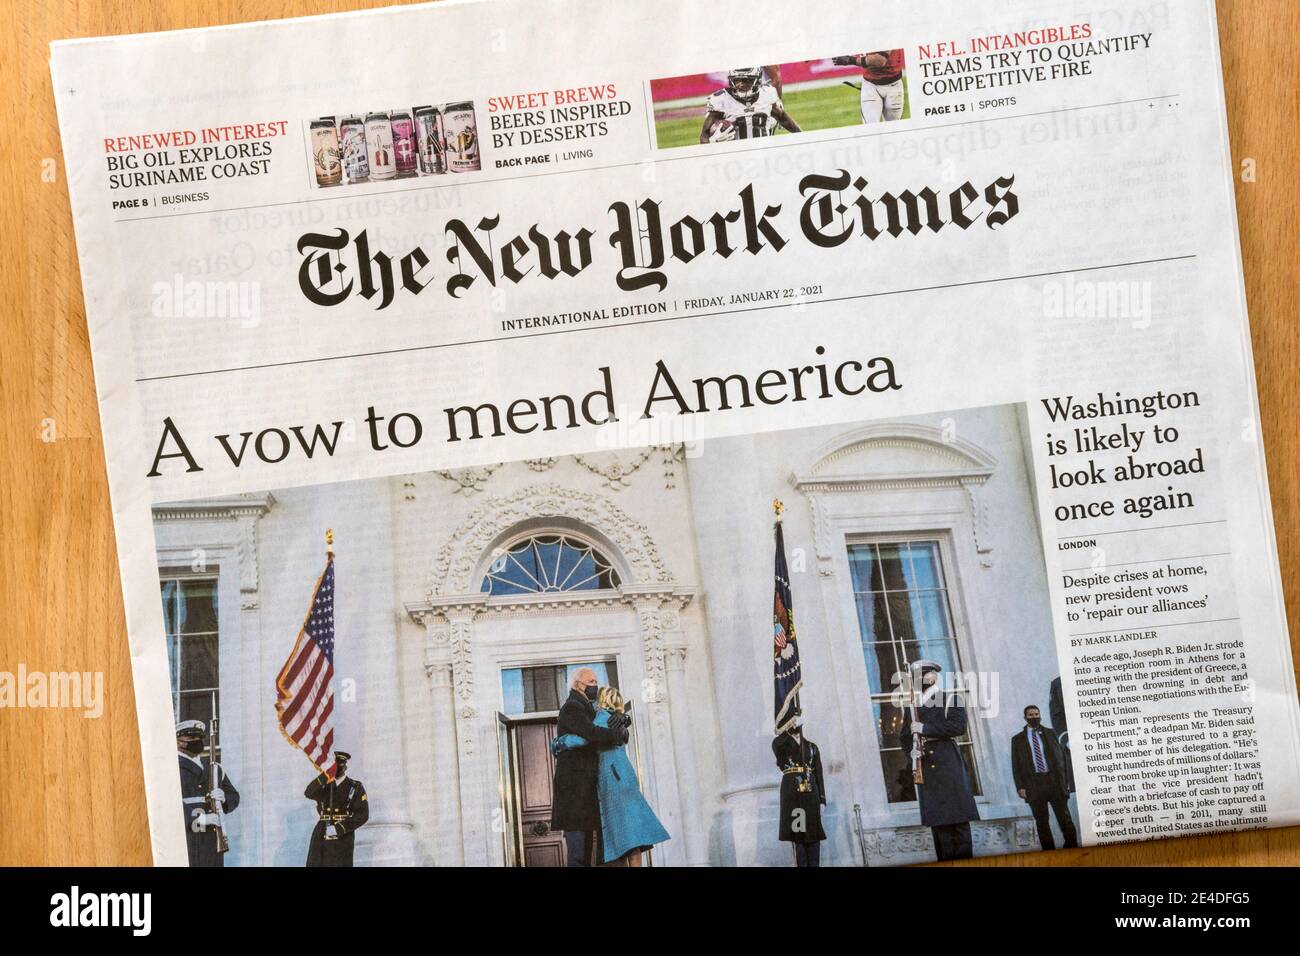 Front page of The New York Times international edition following the election / inauguration of Joe Biden as 46th President of the United States. Stock Photo